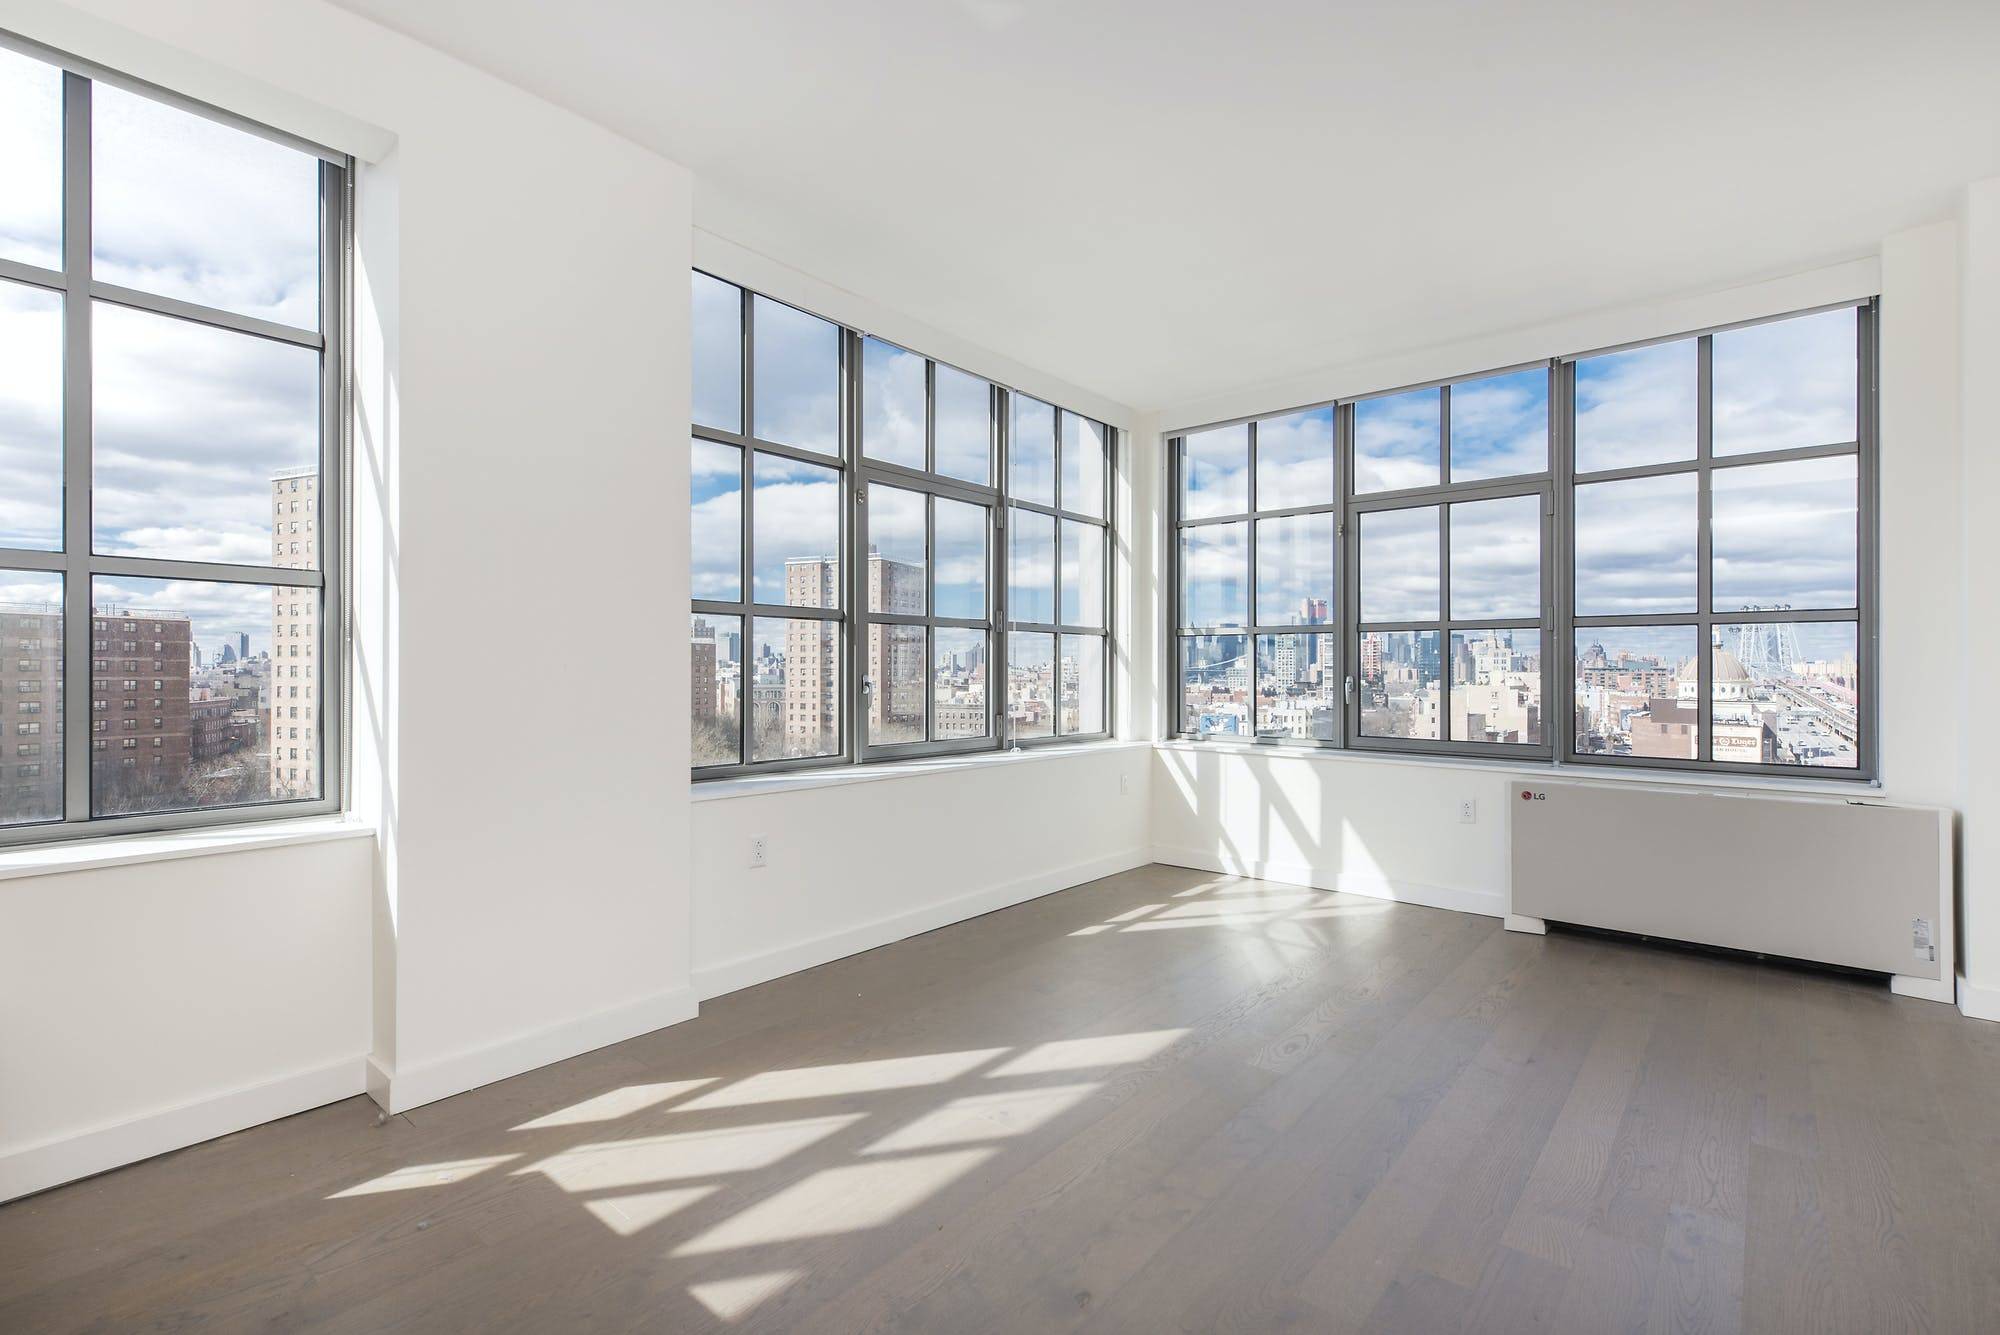 2 Months Free on a 12 Month Lease 3 Months Free on a 24 Month Lease An impressive sun drenched home boasting unobstructed views of Brooklyn and Manhattan.